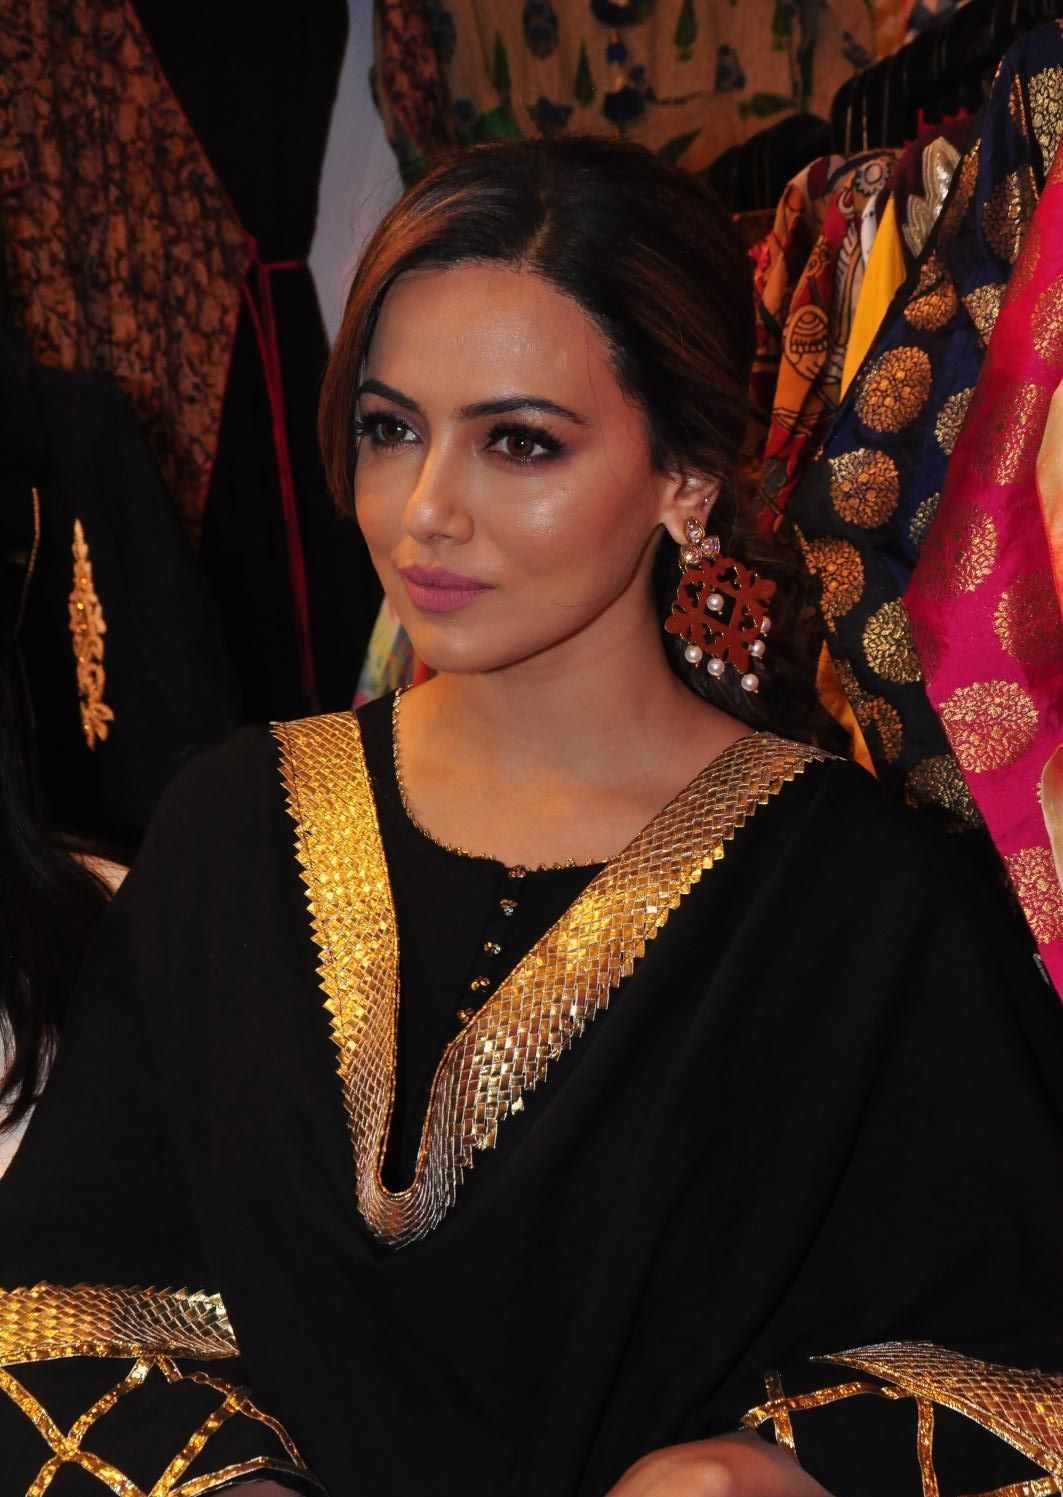 Sana Khan Looks Gorgeous In Black Dress At The Akritti ELITE Exhibitions In Hyderabad